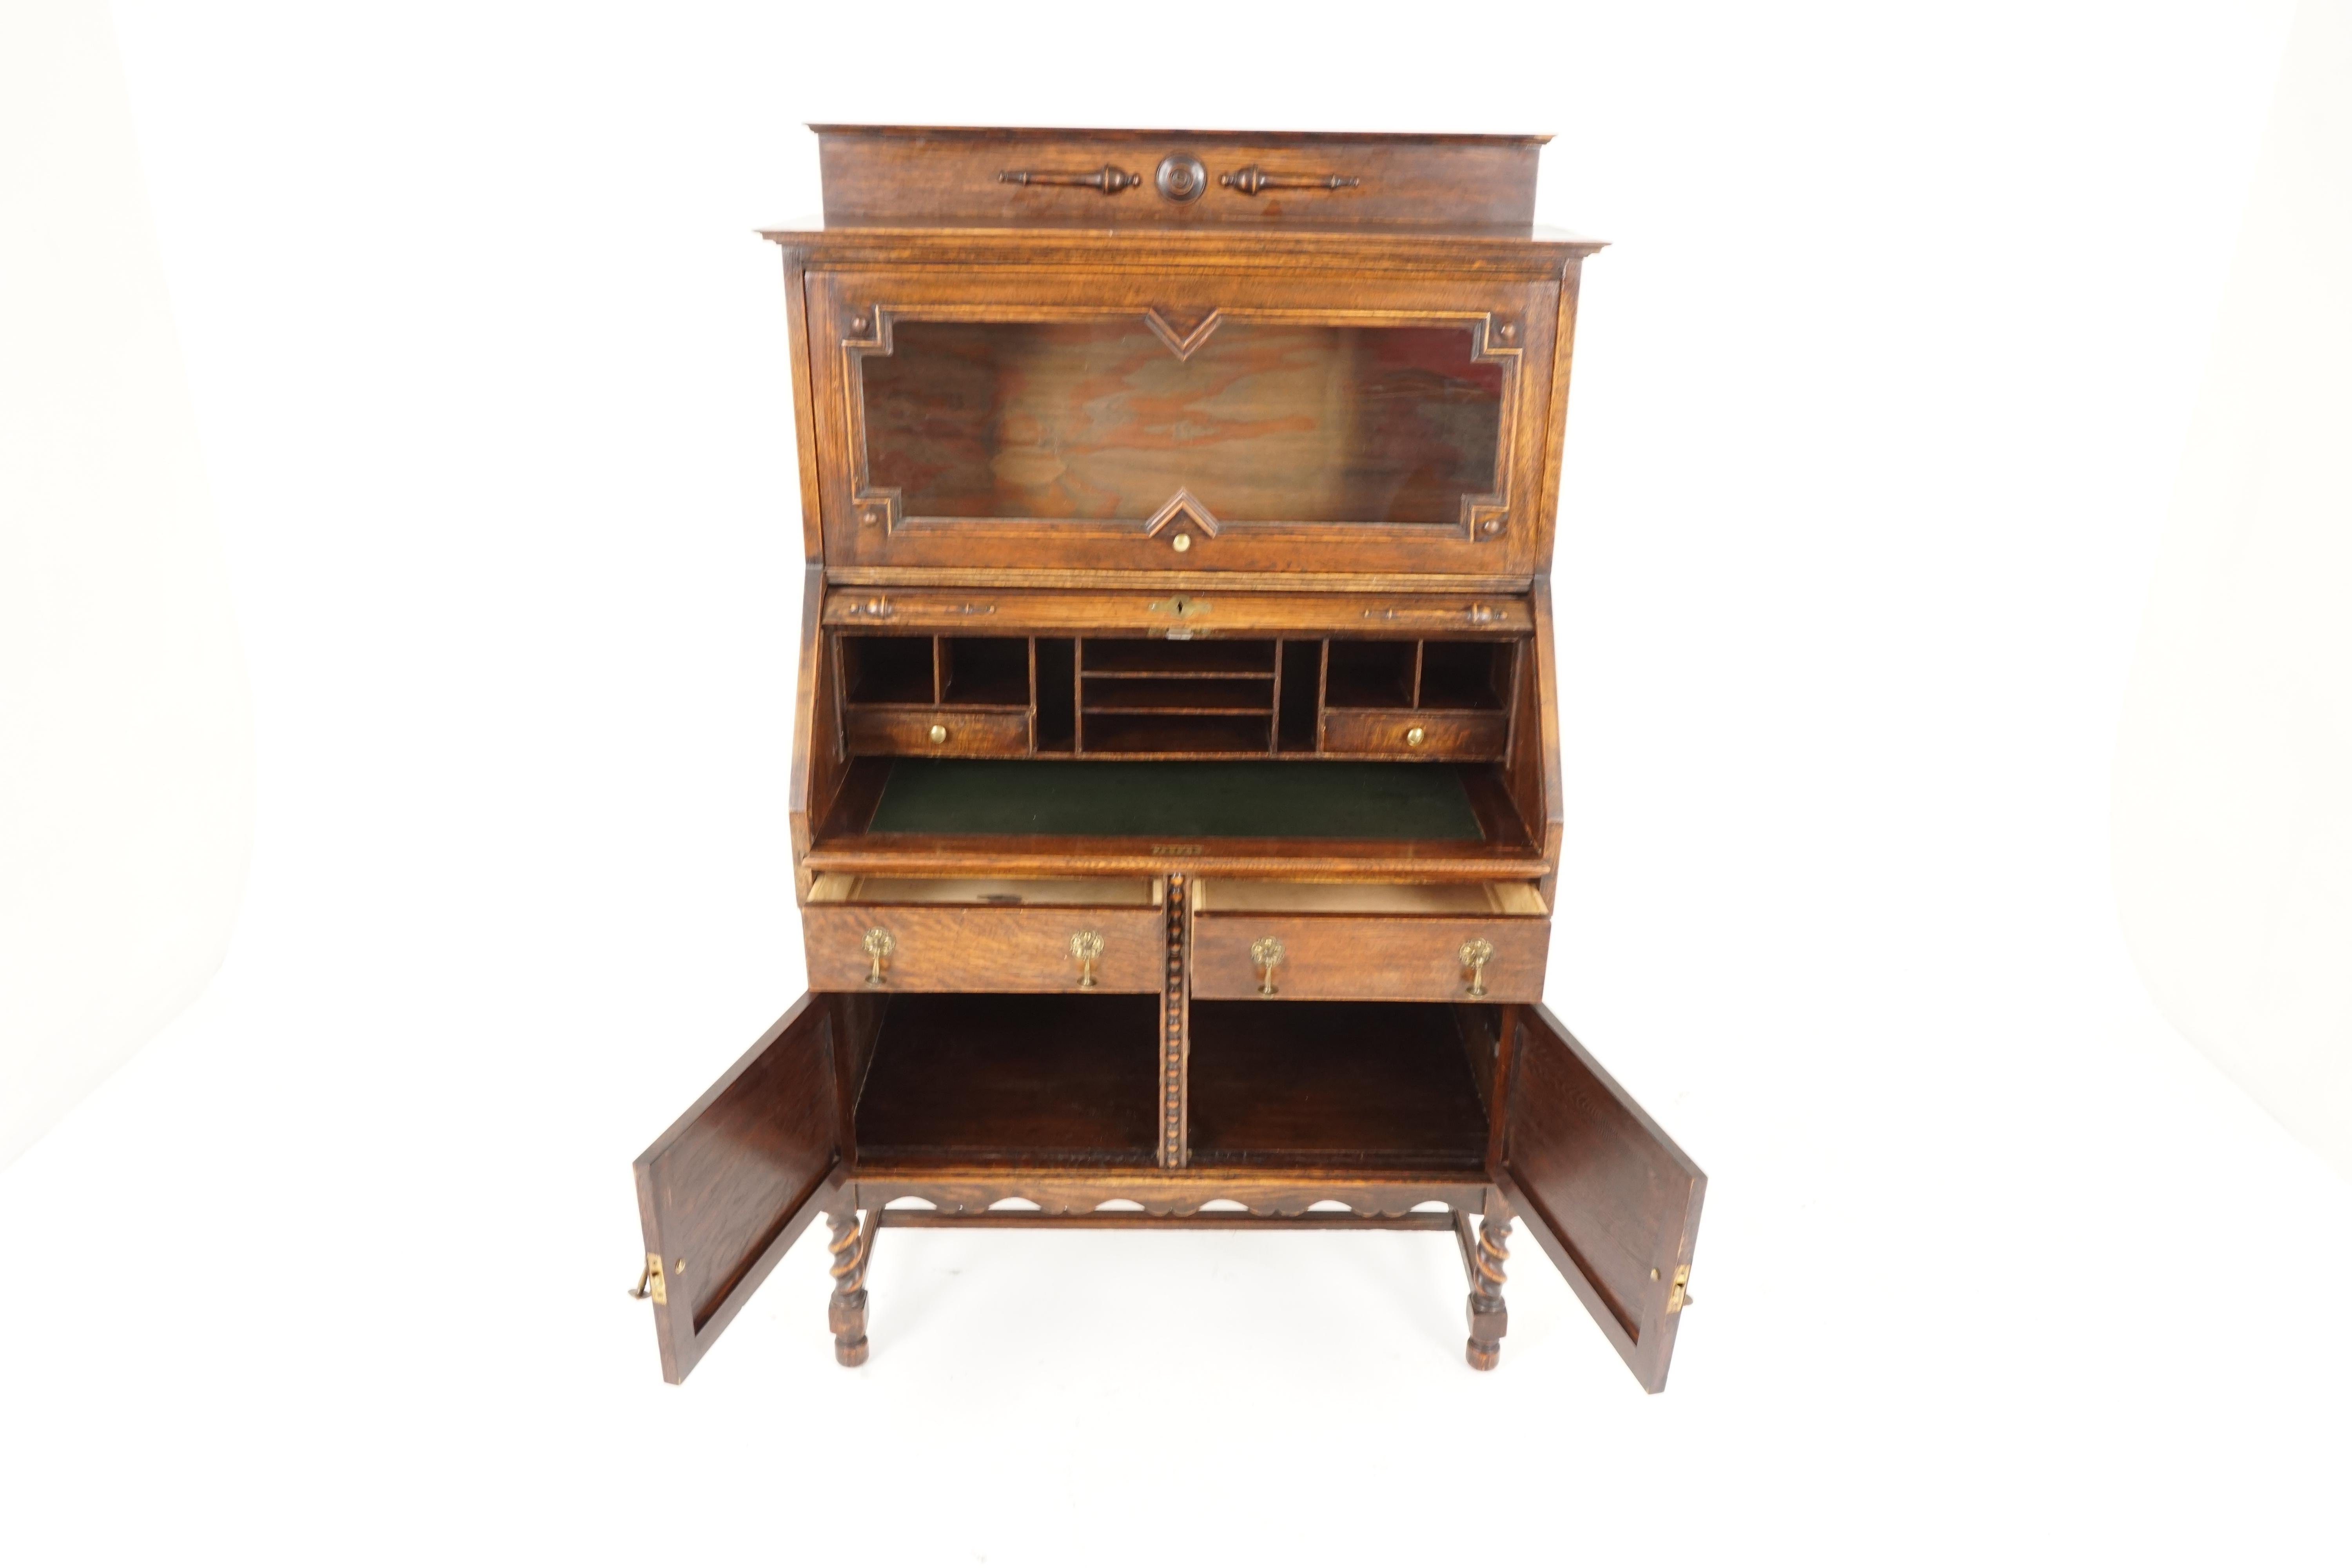 Antique oak barley twist roll top desk shutter front desk, Scotland 1910, B2197

Scotland 1910
Solid oak
Original finish
Raised gallery back
Bookcase below with up and over glass door
Roll top desk with lock and key
Pull out leather top